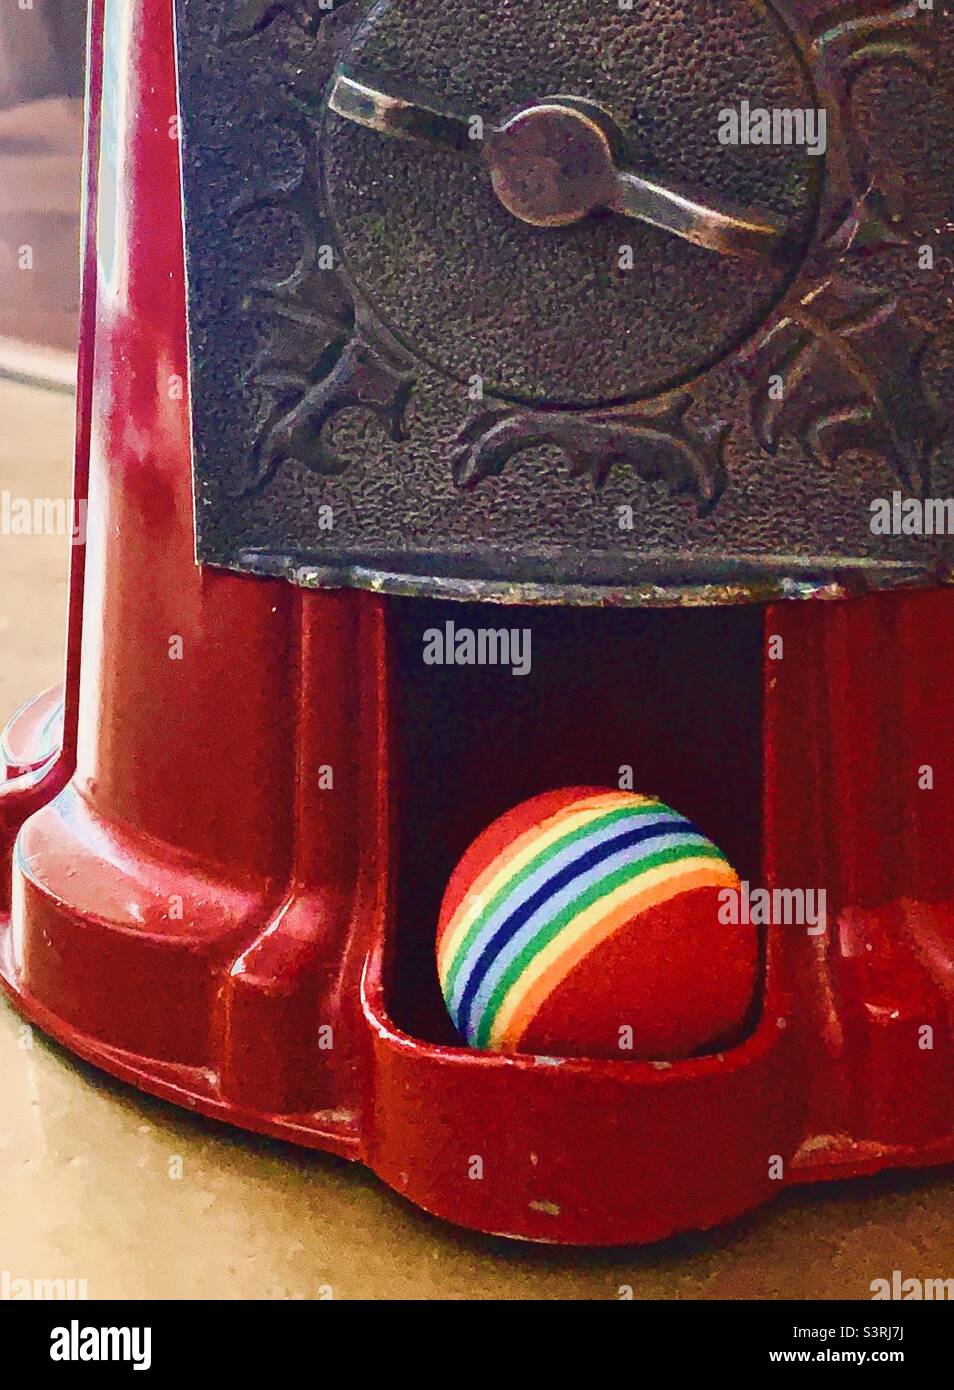 Closeup of red gum ball machine with candy Stock Photo